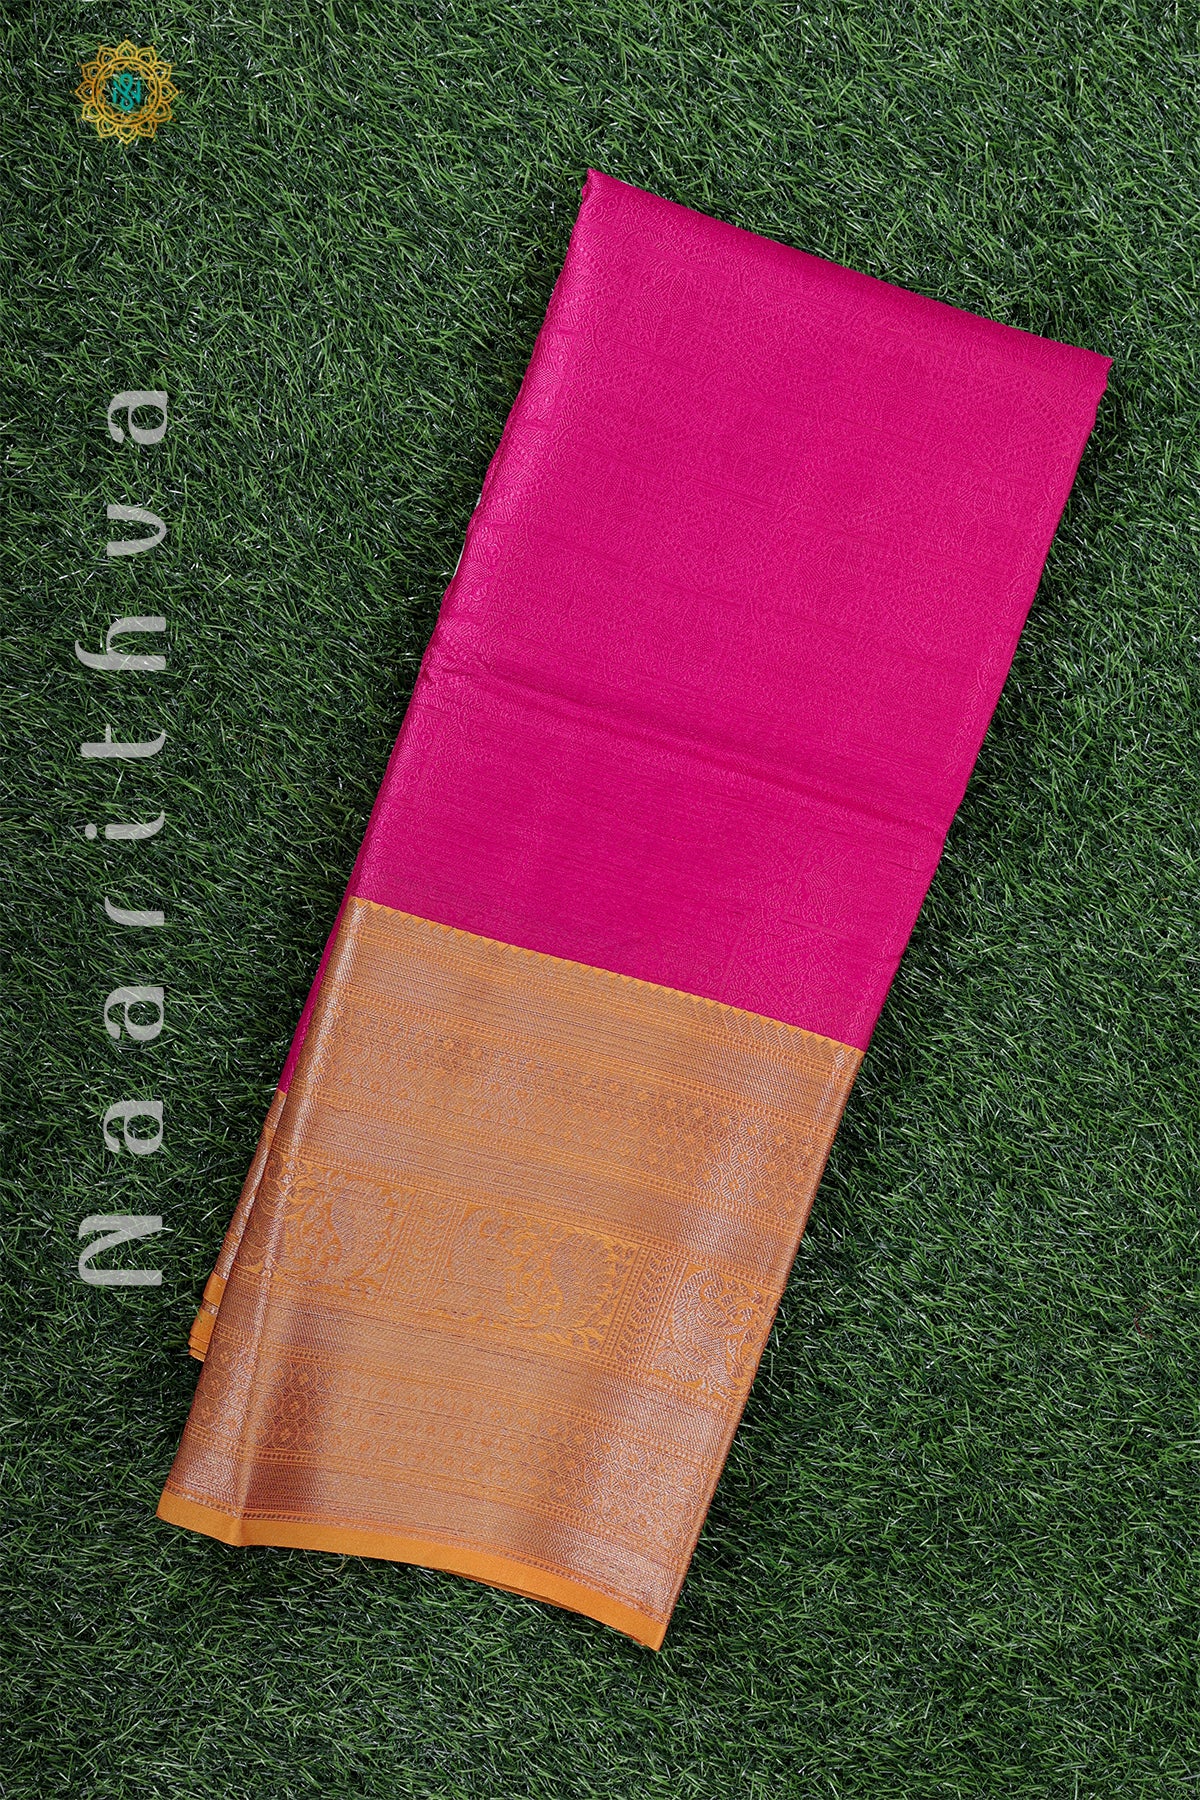 PINK WITH YELLOW - KORA TANCHOI SILK WITH CONTRAST BORDER